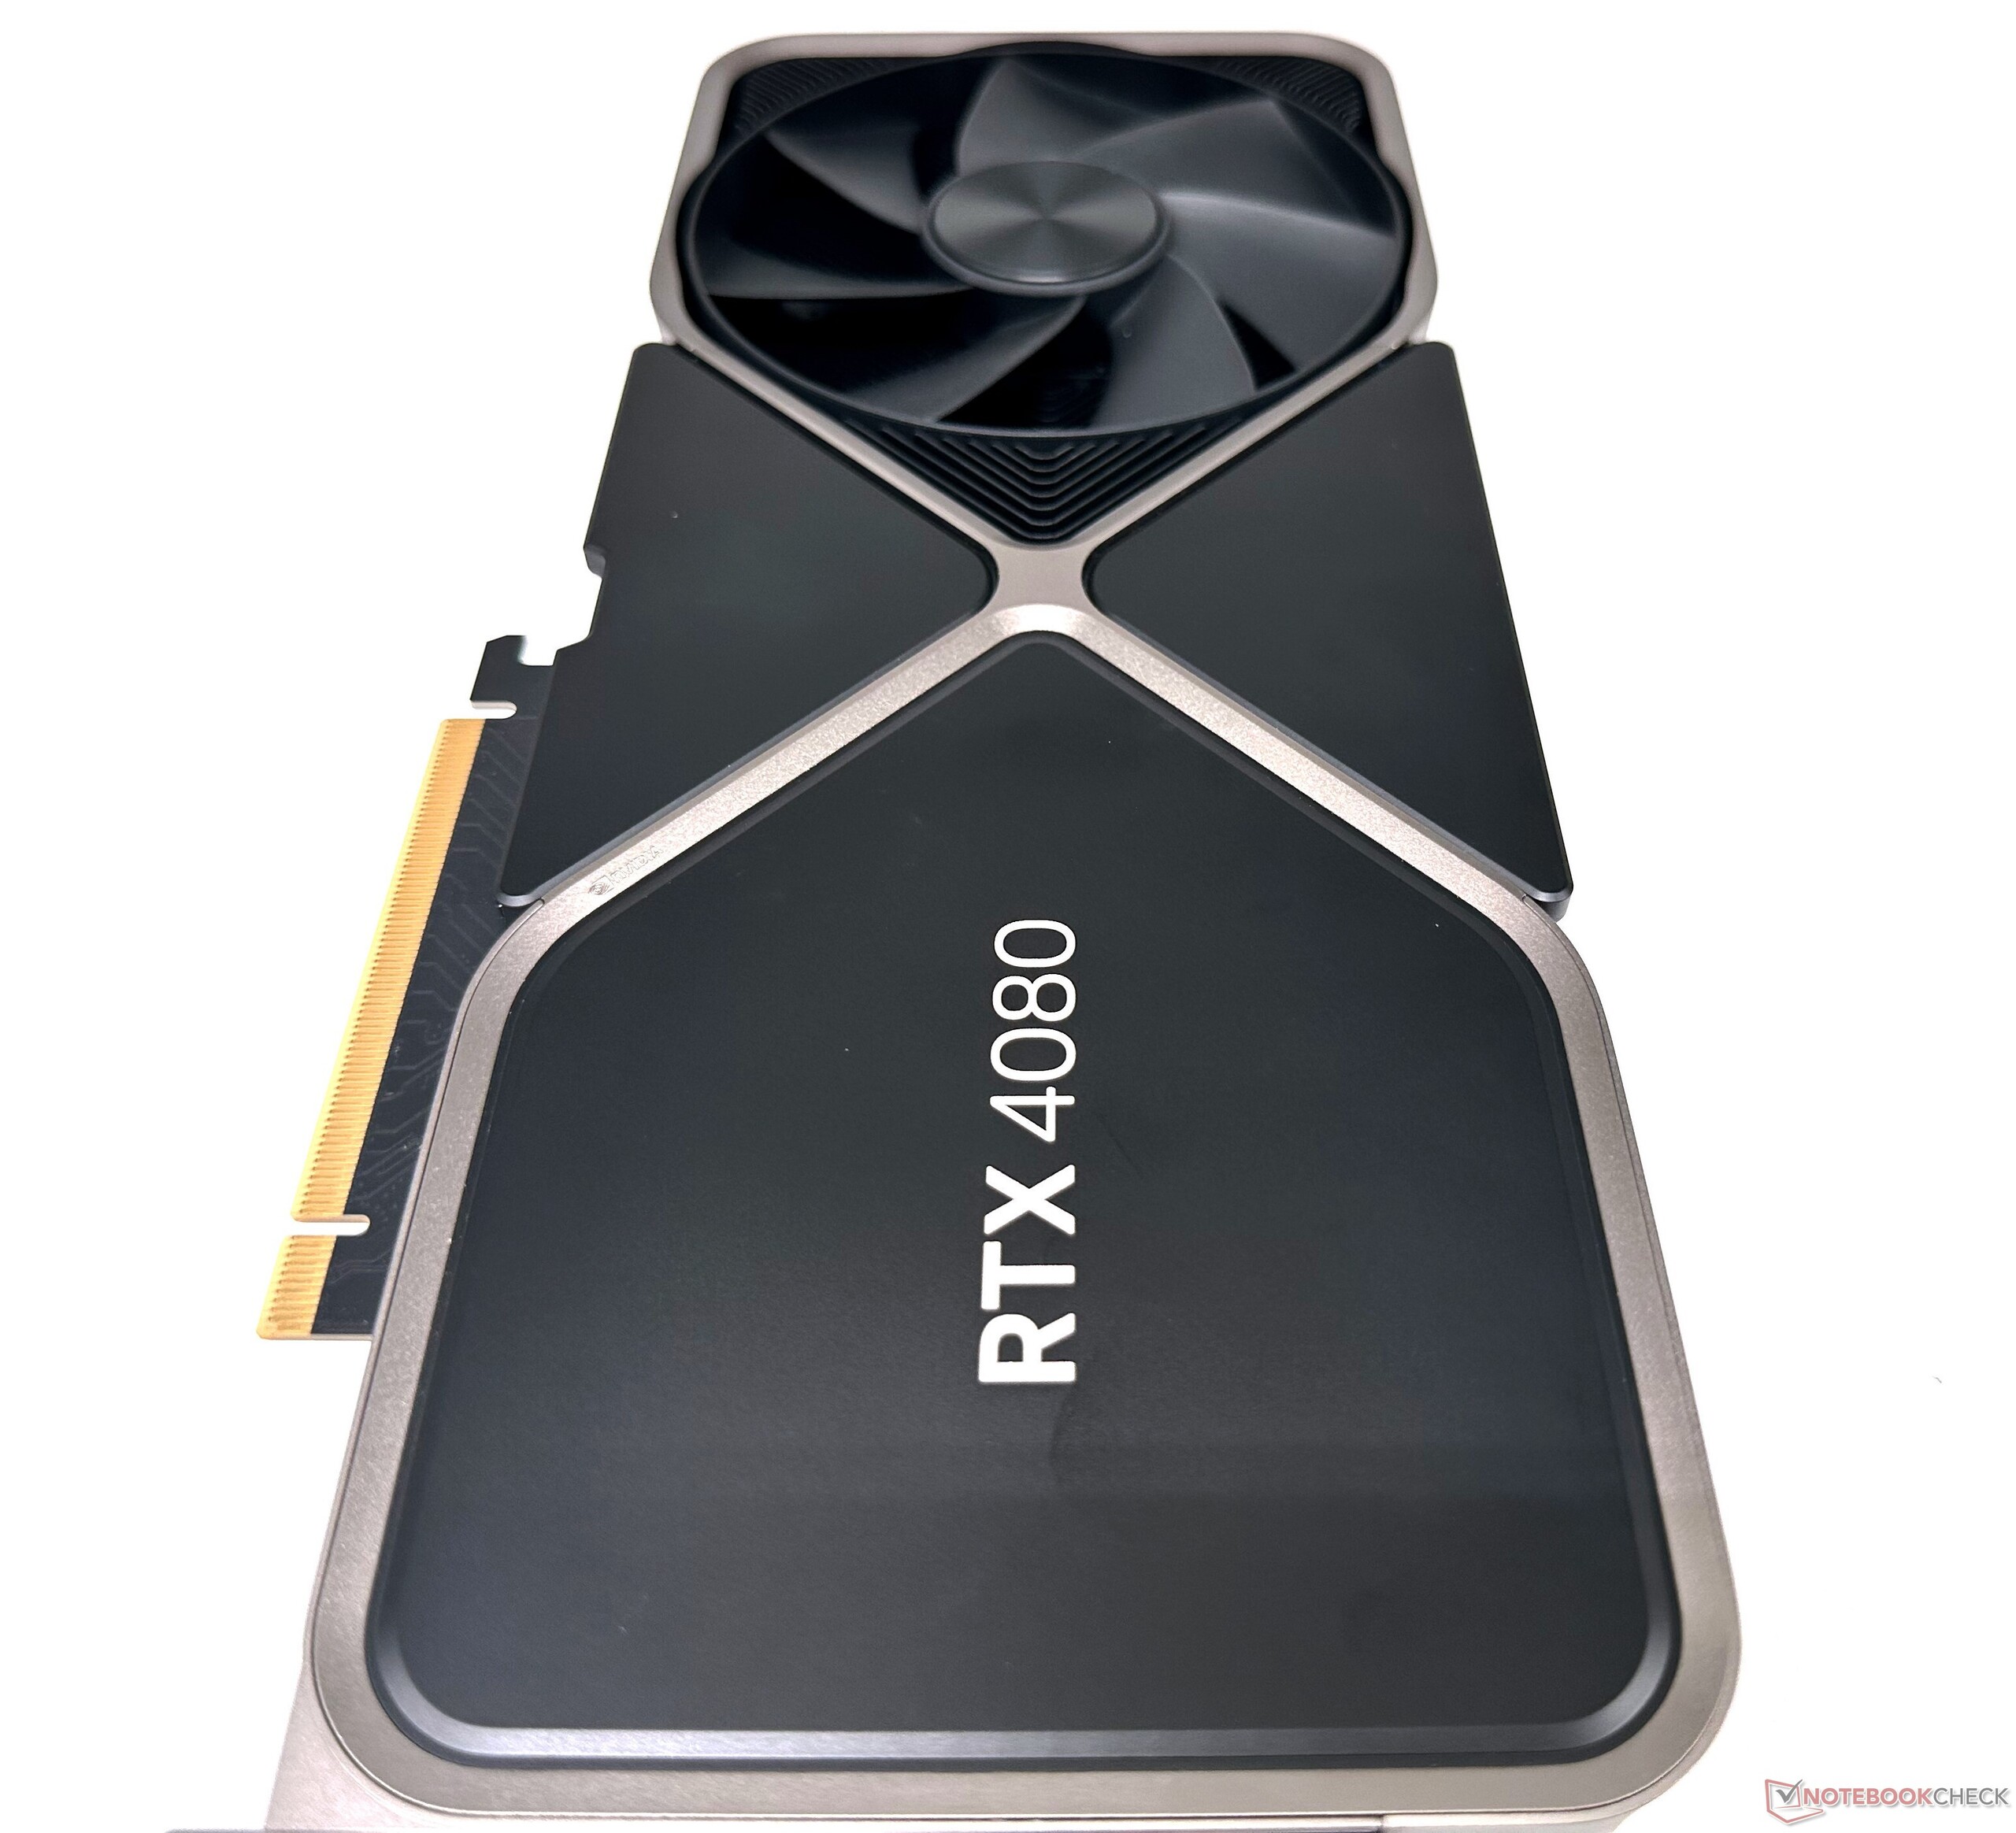 RTX 4080 Super confirmed - release date, specs, and price